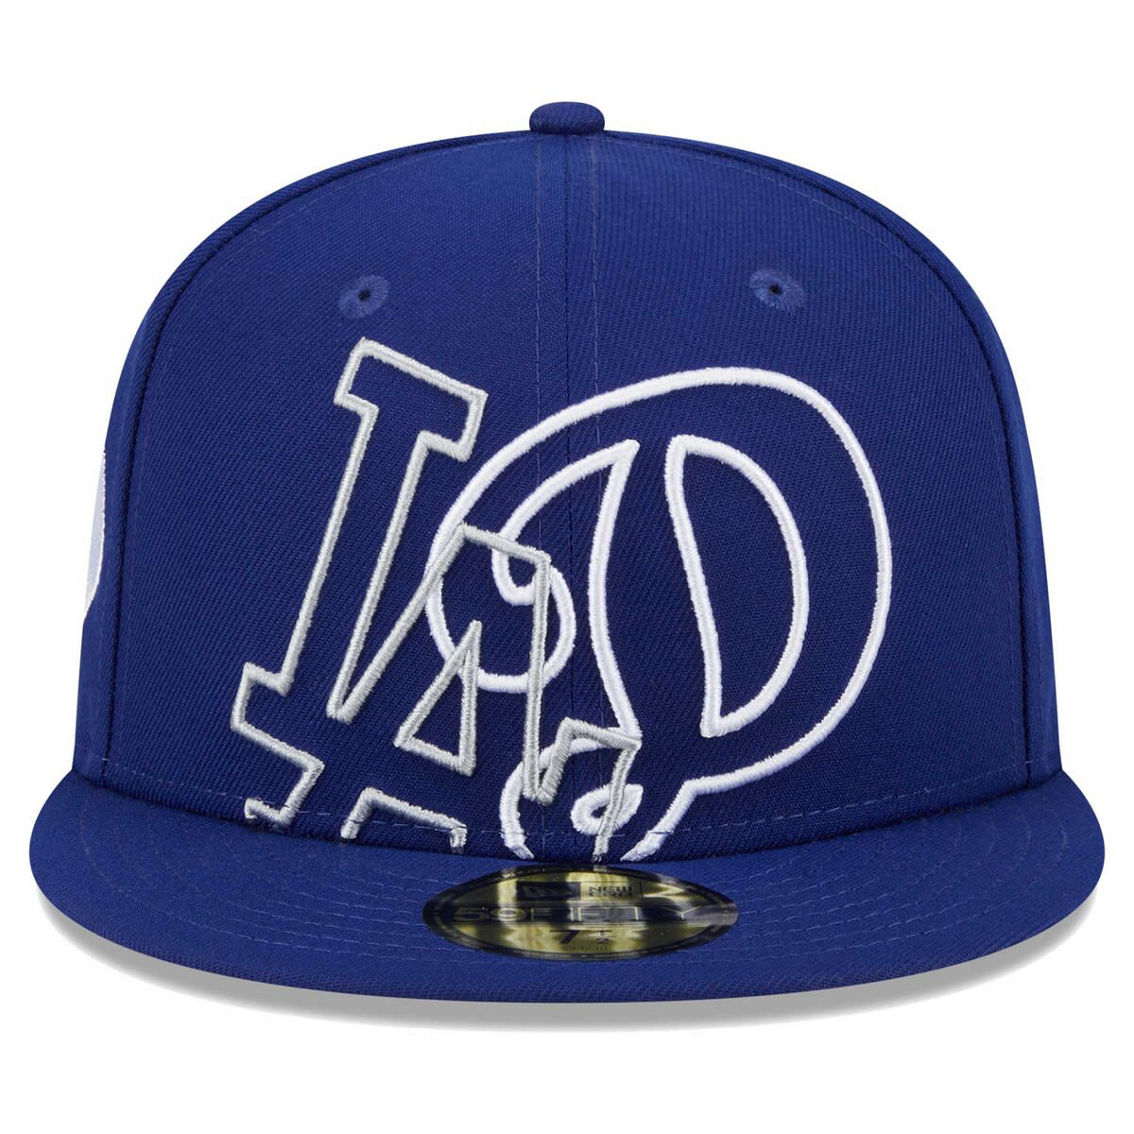 New Era Men's Royal Los Angeles Dodgers Game Day Overlap 59FIFTY Fitted Hat - Image 3 of 4